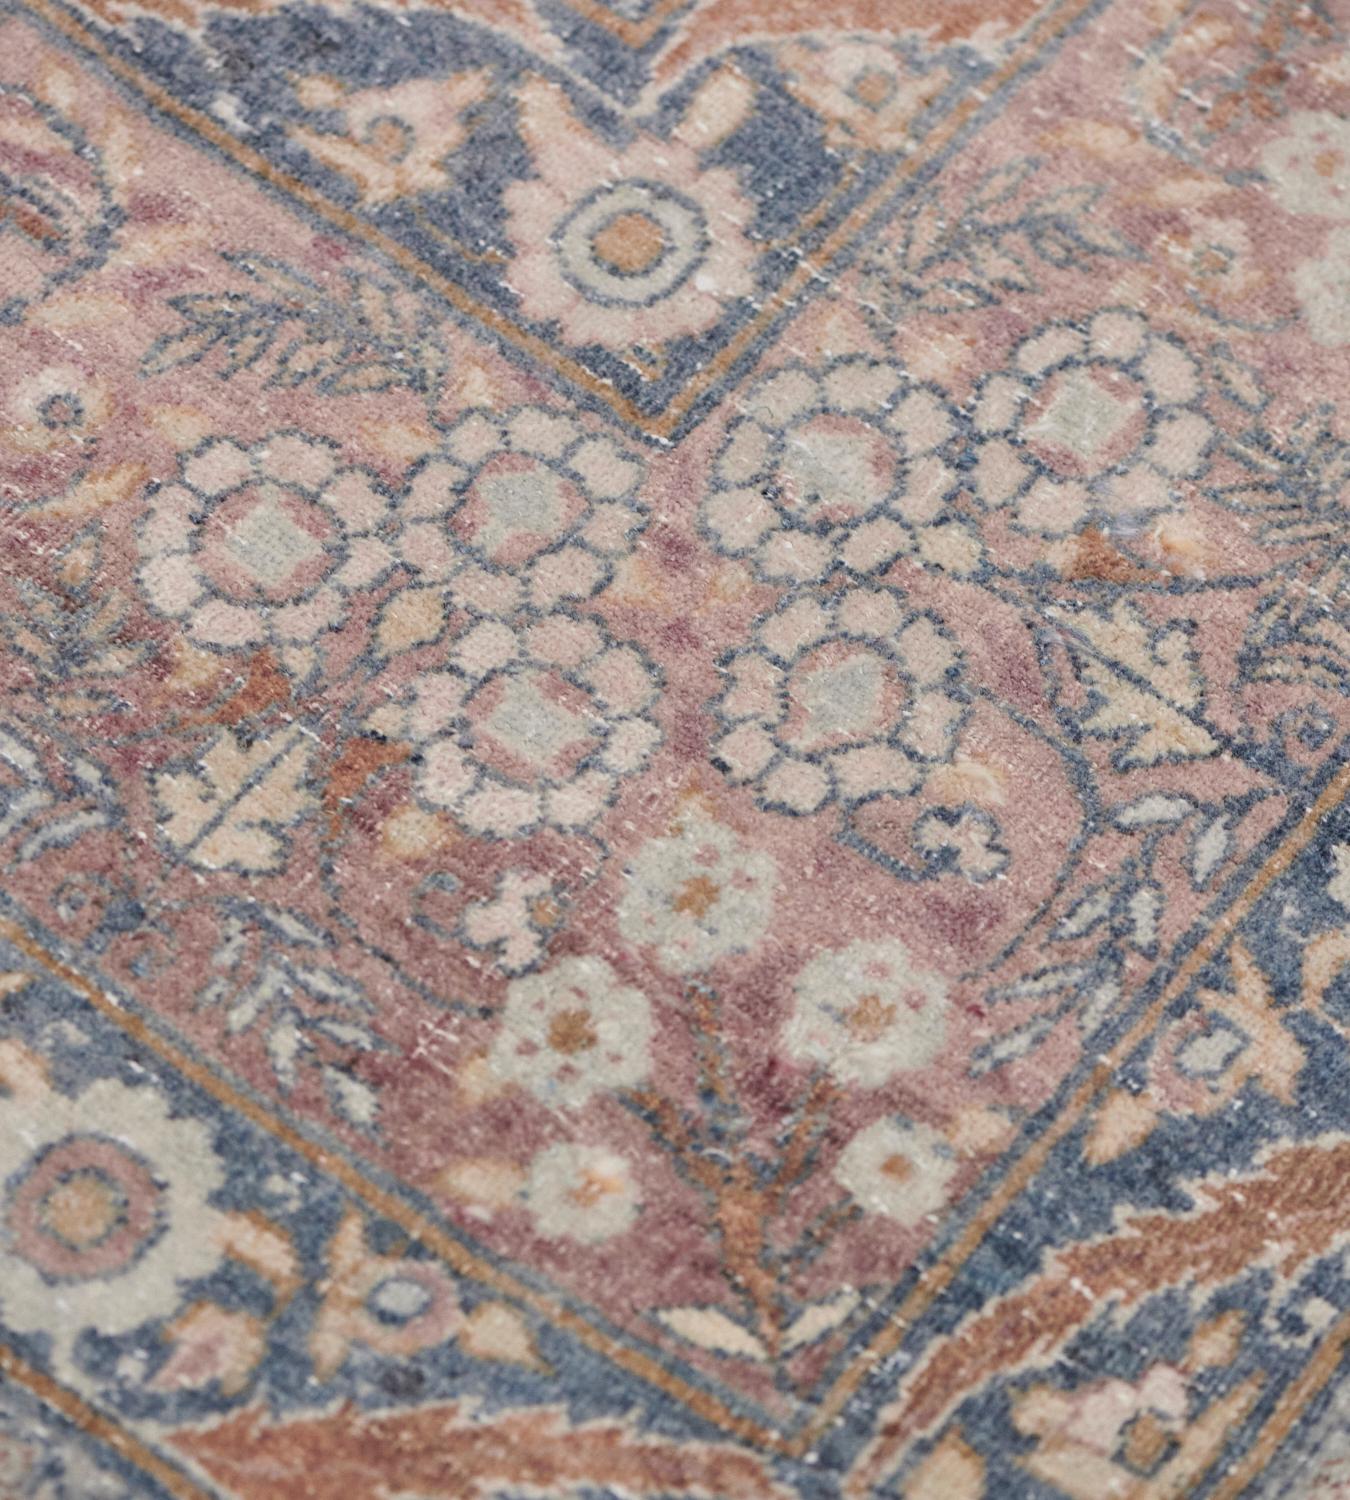 This antique Kirman Rug has a shaded blue-grey field with an overall design of polychrome palmette and serrated leaf vine, in a broad shaded light burgundy border of dense floral sprays and delicate scrolling floral vine between shaded blue floral